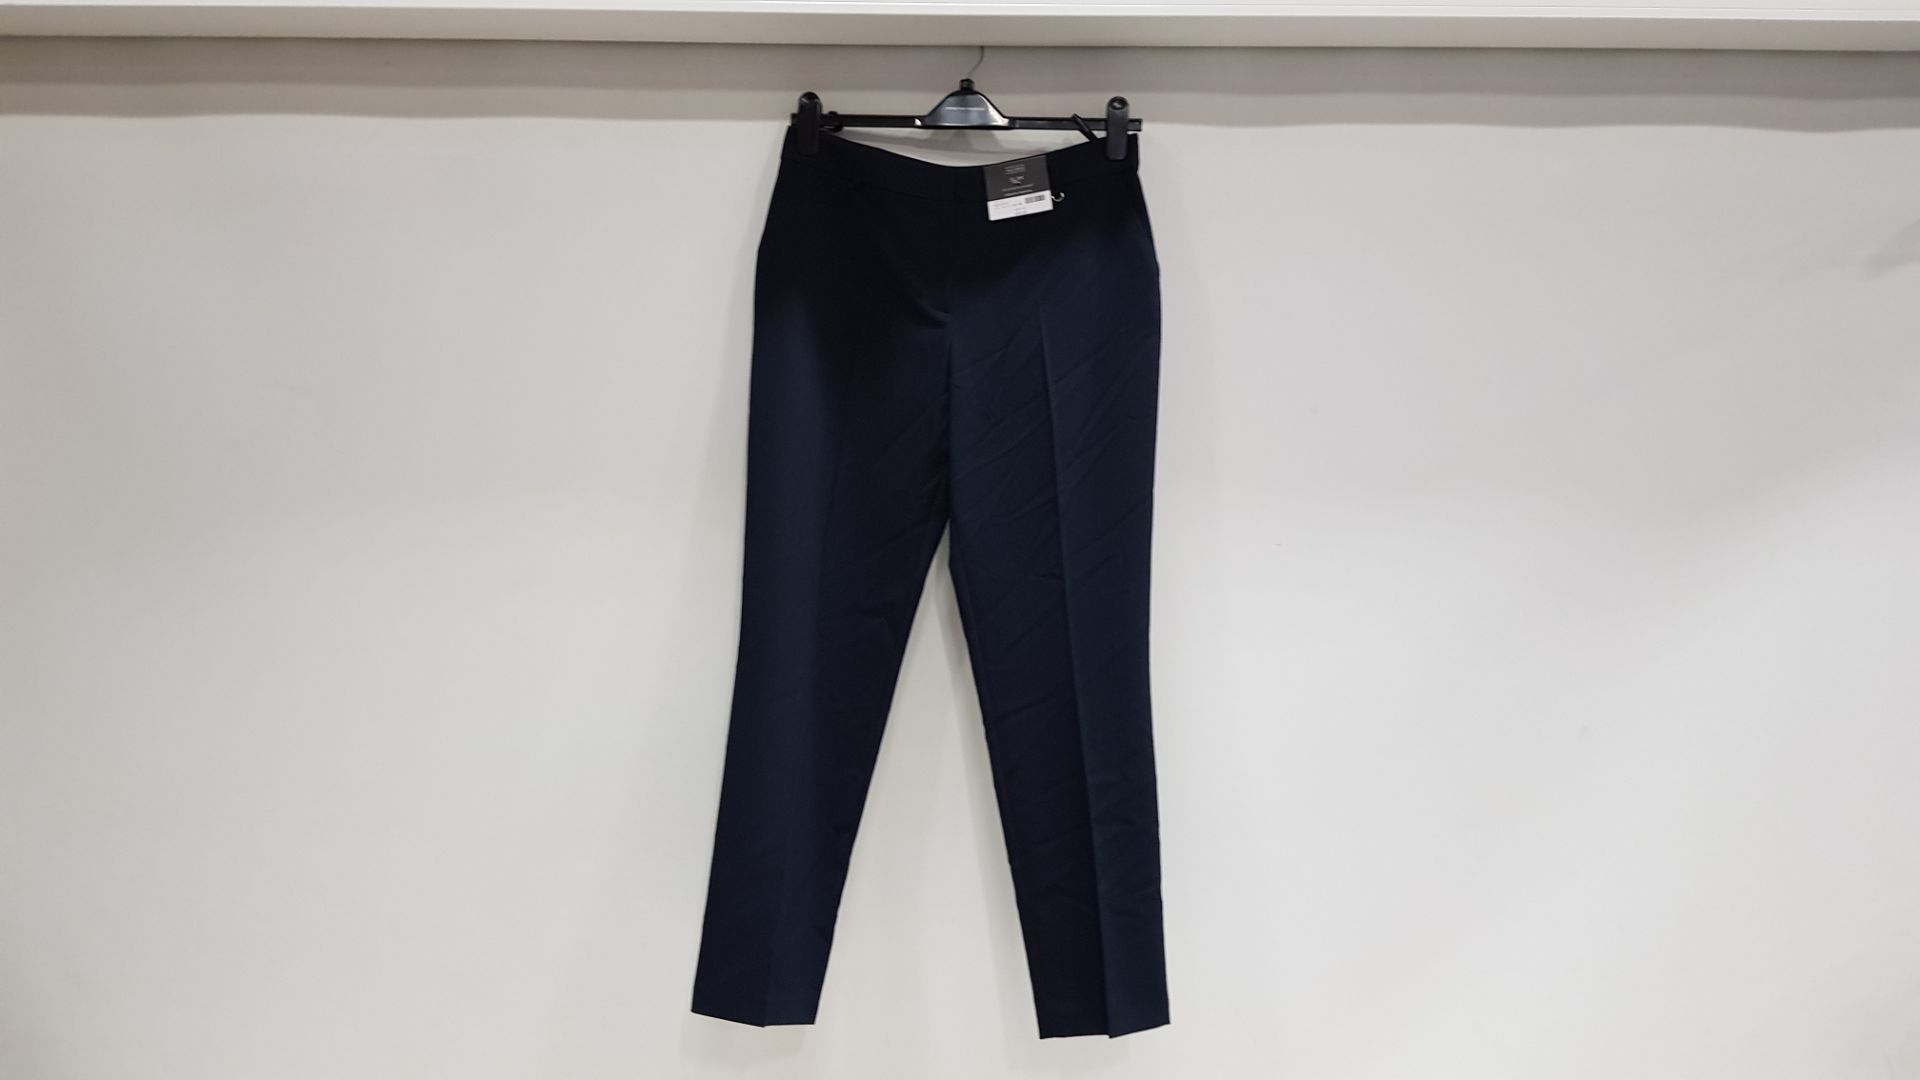 20 X BRAND NEW DOROTHY PERKINS NAVY SLIM TROUSERS IN SIZE 10, 12 AND 14 RRP £20.00 (TOTAL RRP £400.